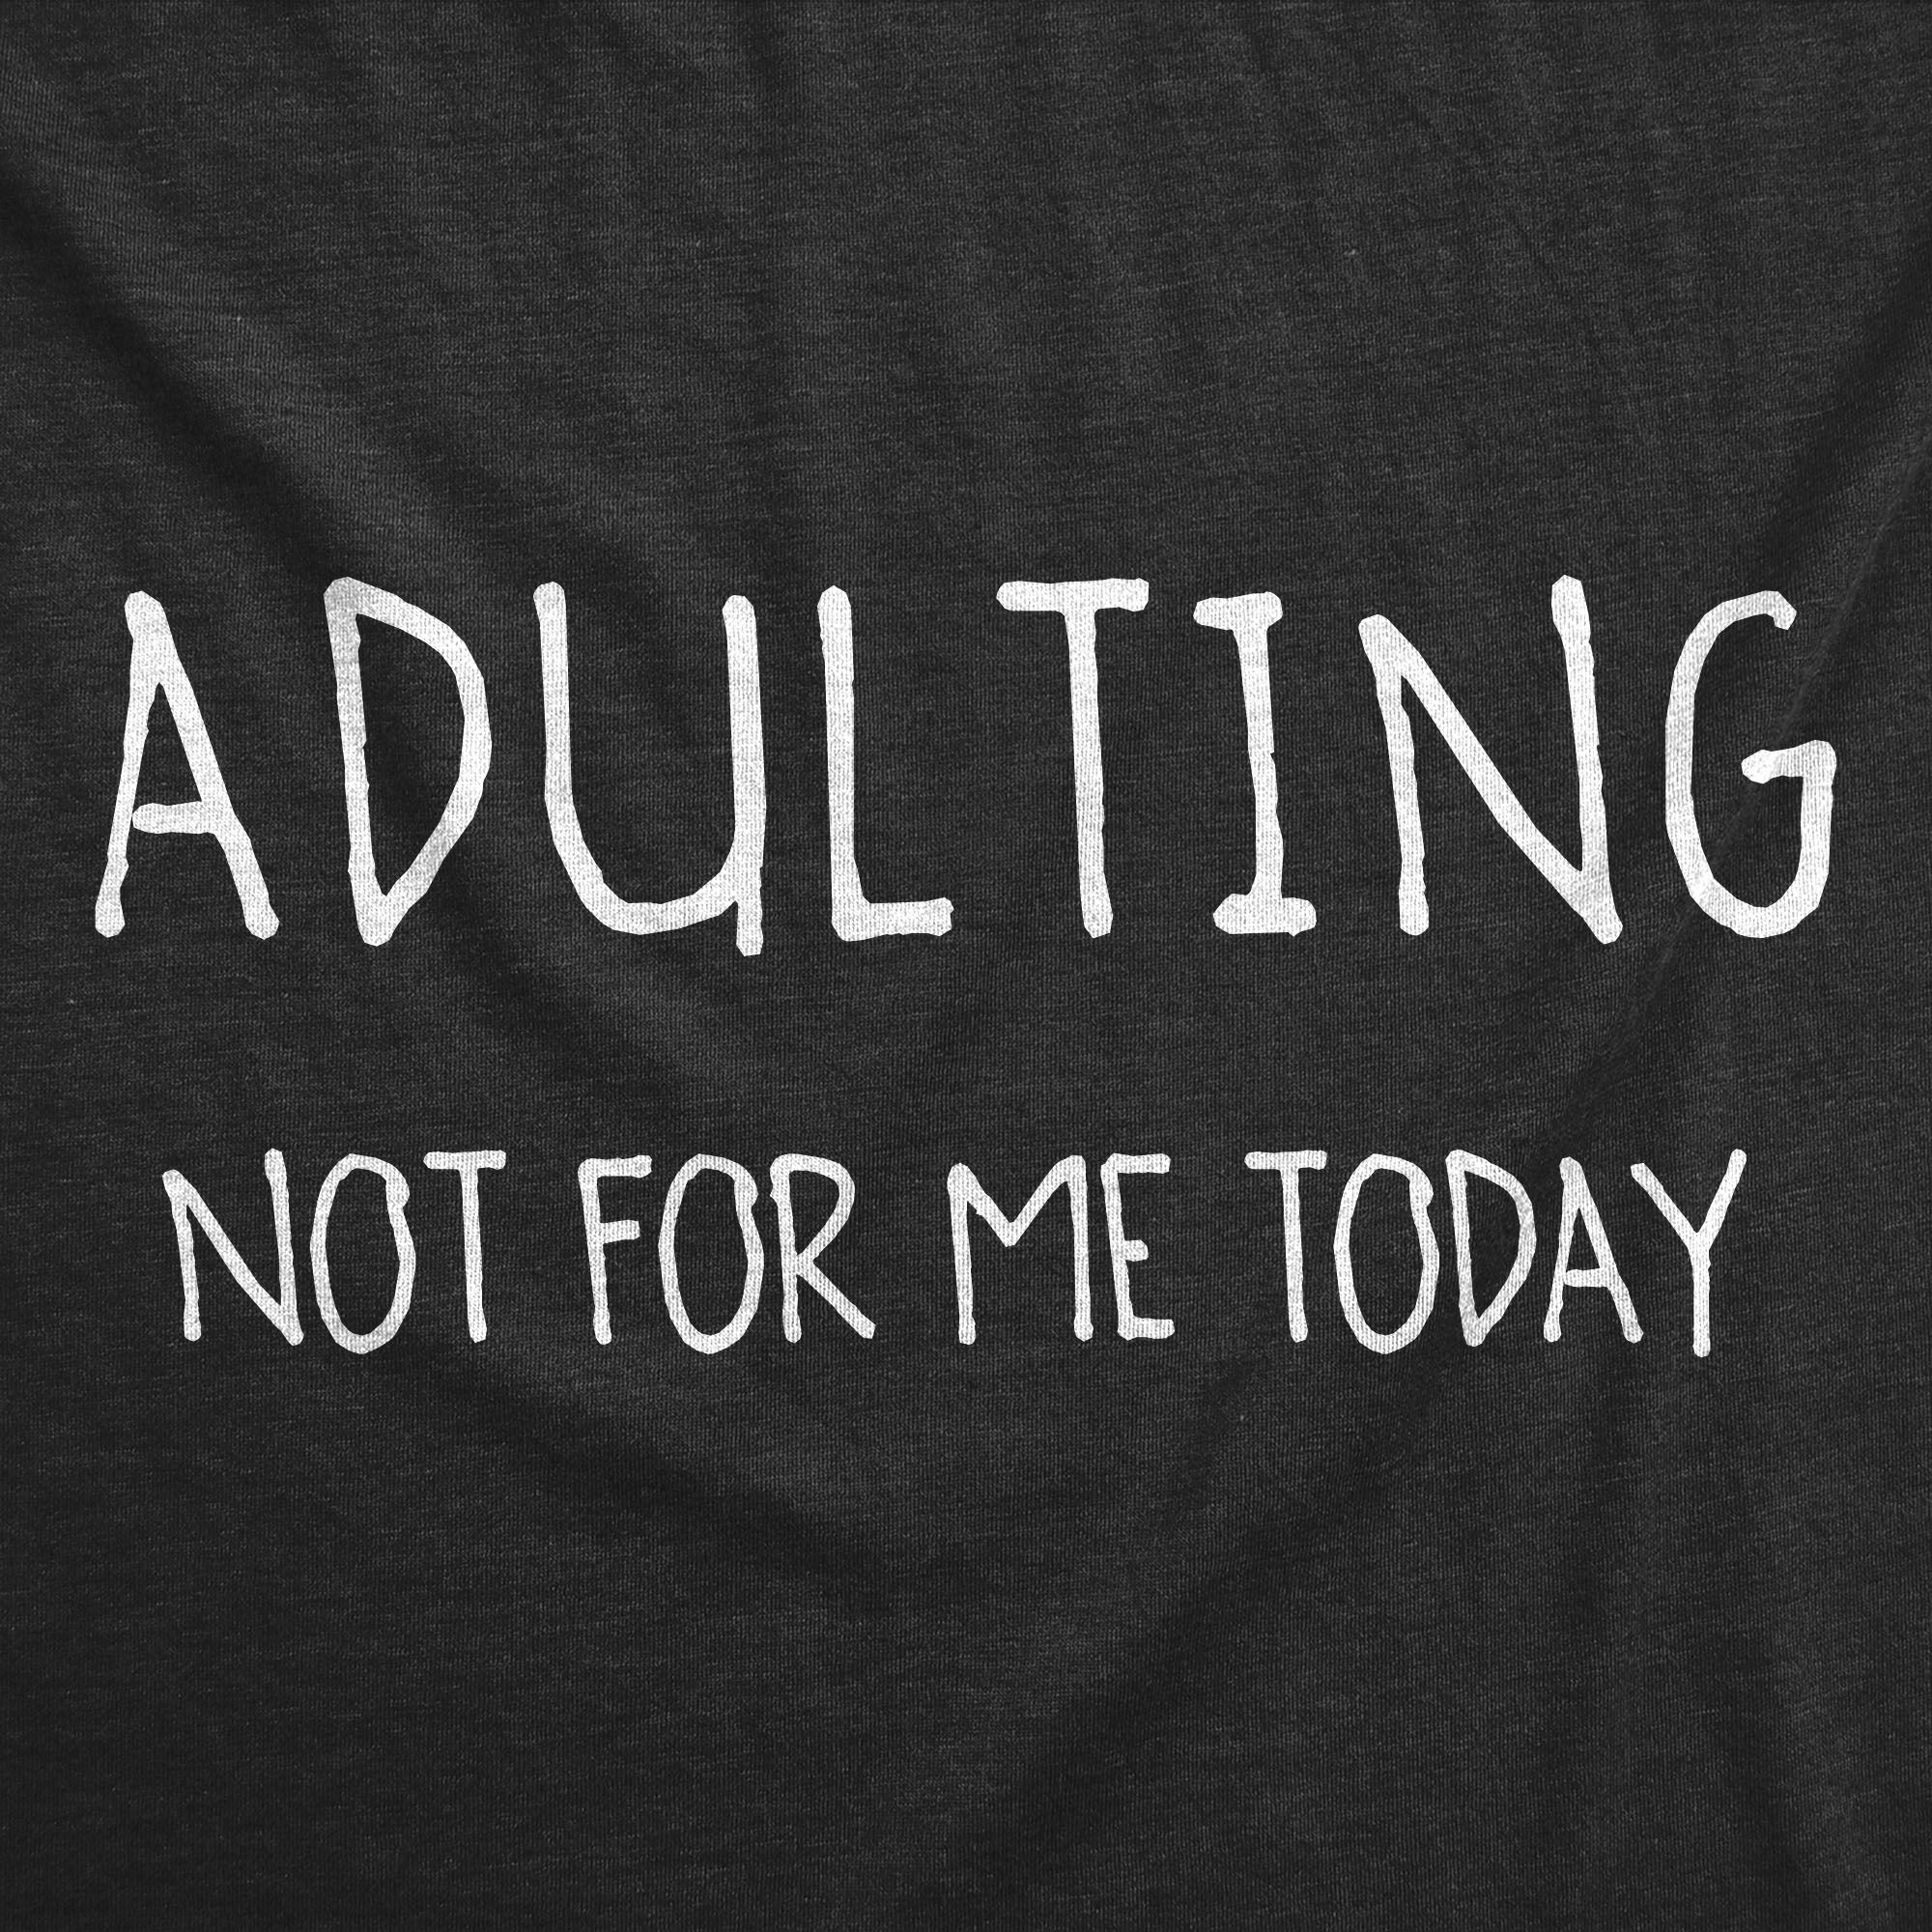 Crazy Dog Tshirts Mens Adulting Not For Me Today Tshirt Funny Sarcastic Self Mocking Adult Tee